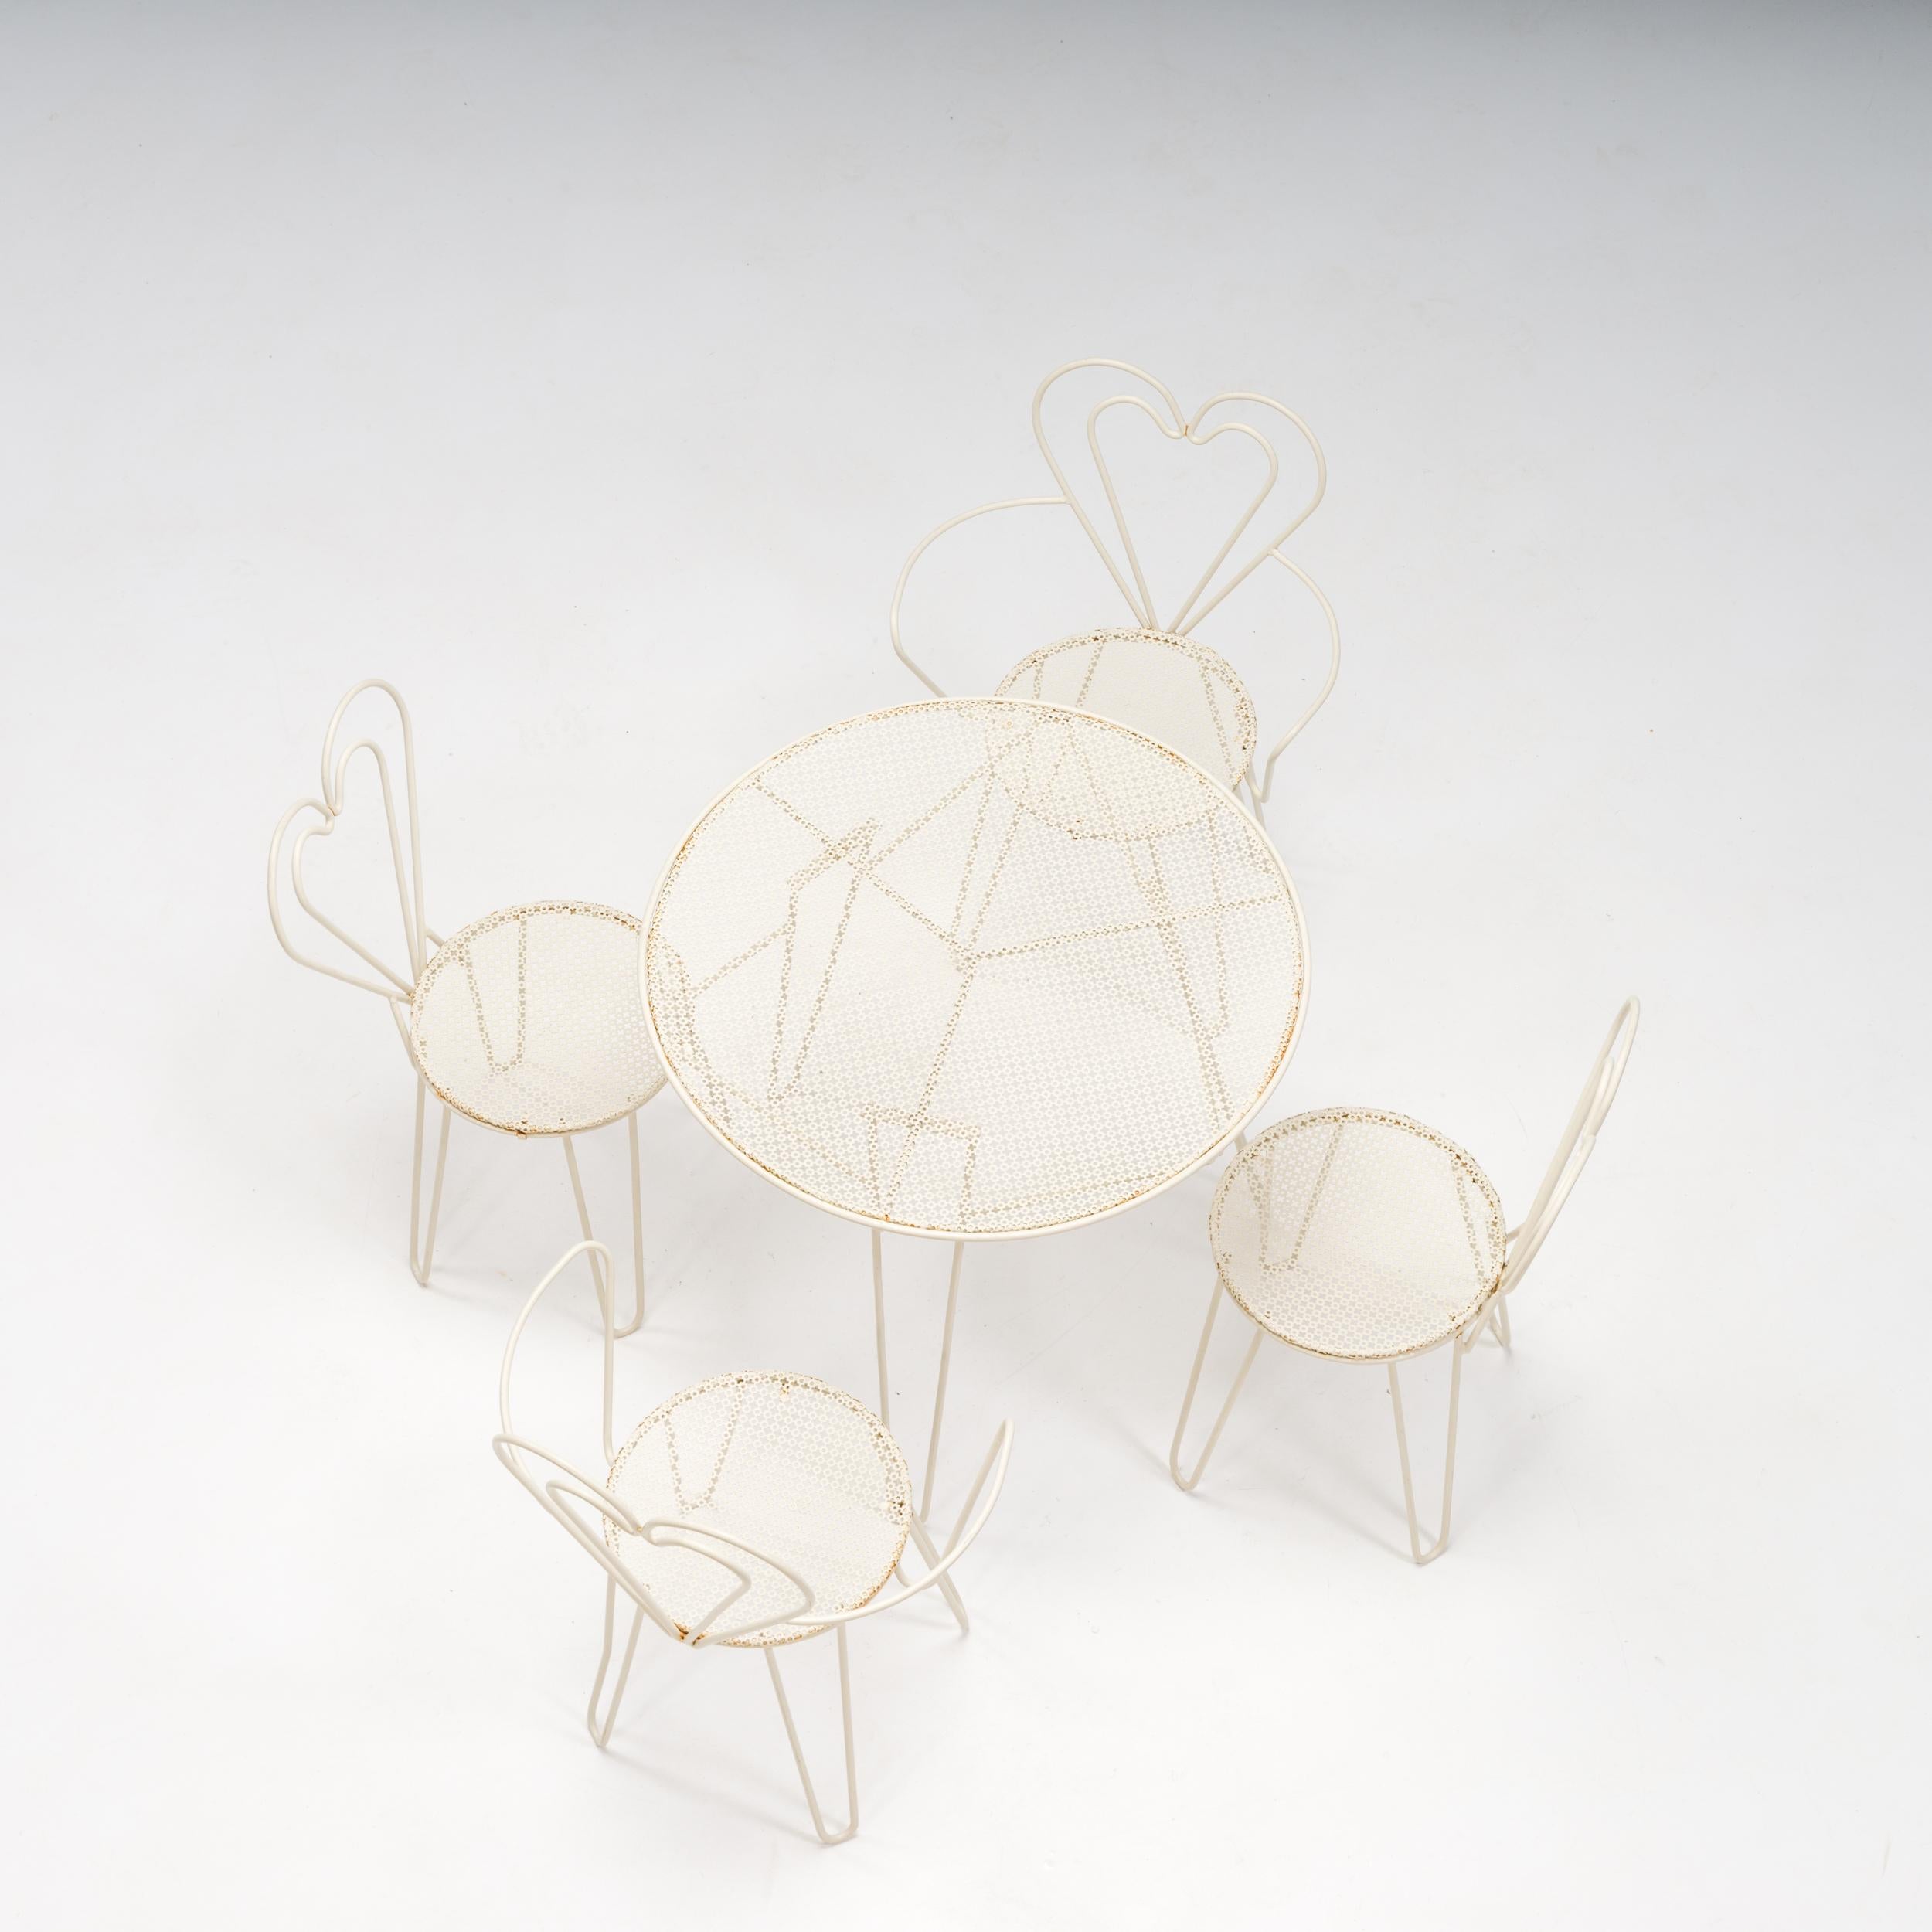 One of the most renowned French designers of the 1950s, Mathieu Matégot was famous for his work with metal, and his garden furniture remains highly collectible.

Comprising a round table and four chairs, this garden set is constructed from tubular